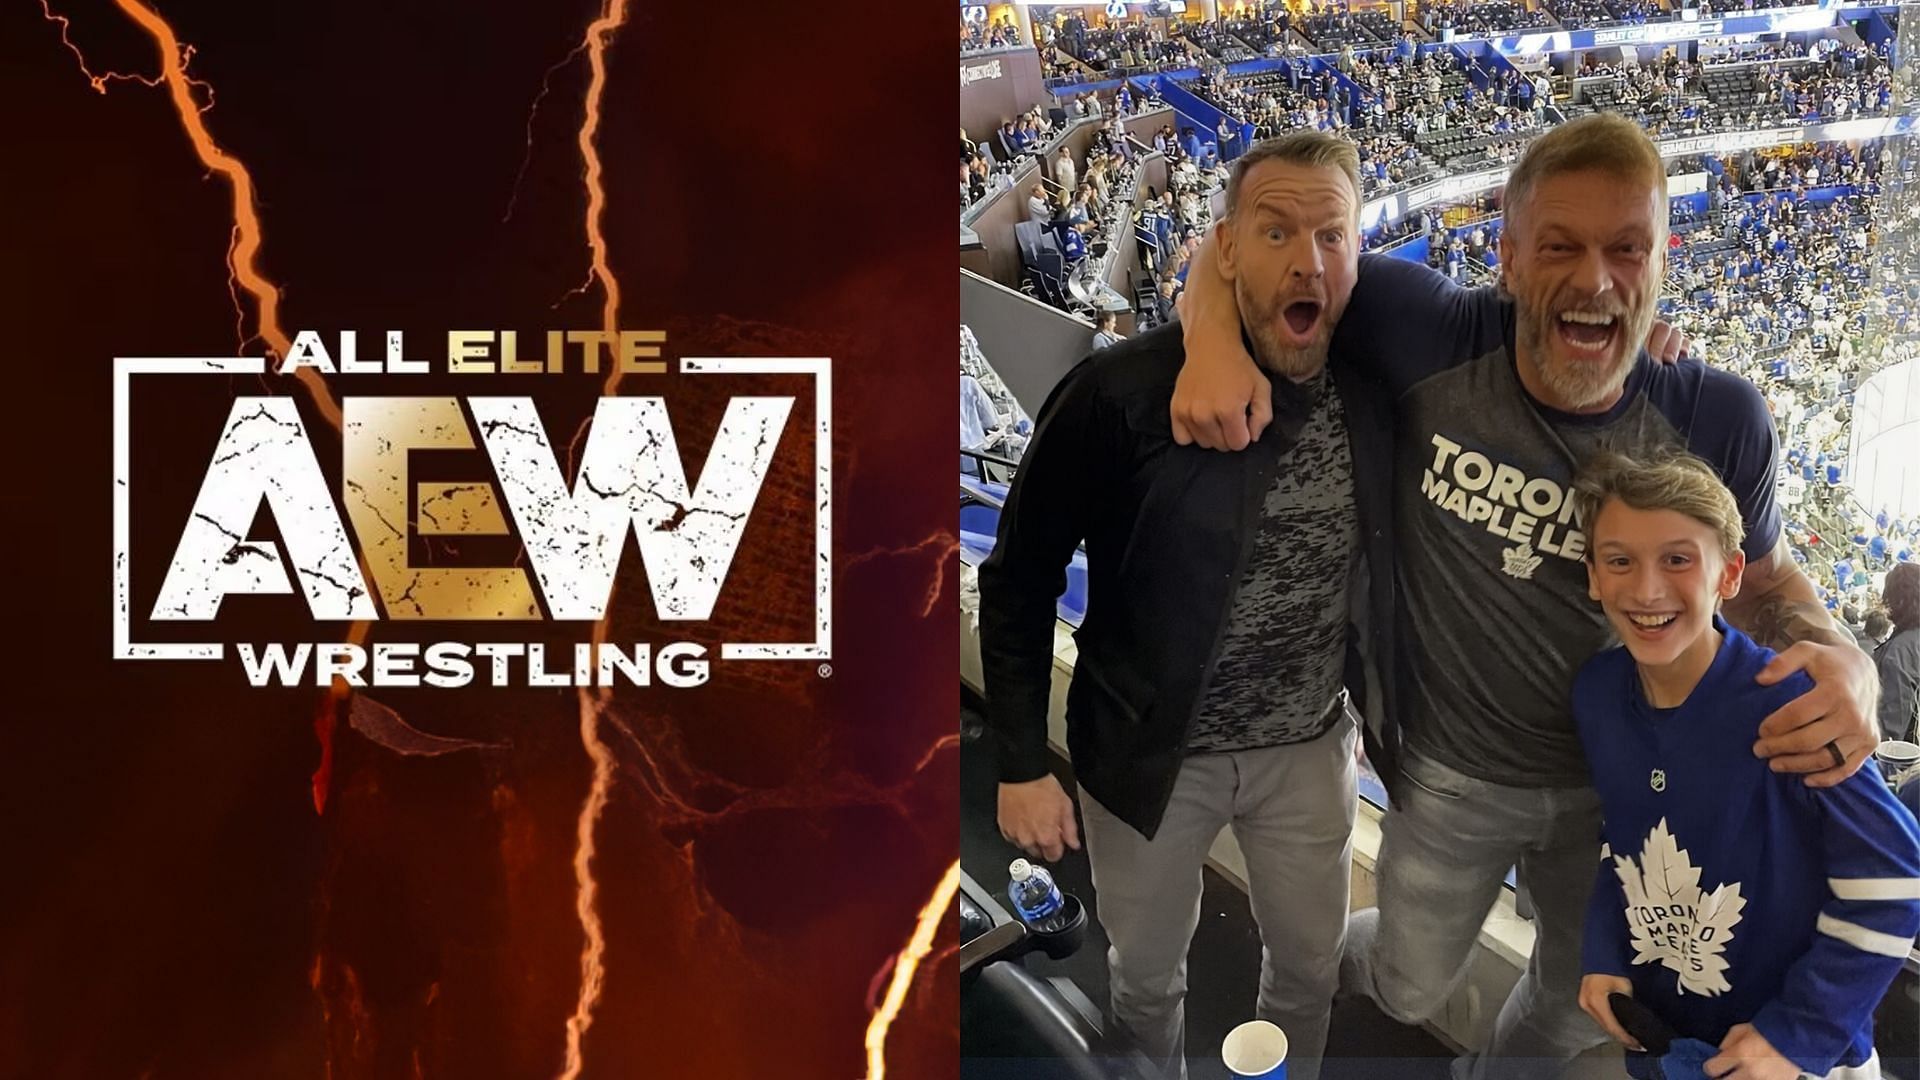 Edge, Christian, and Brodie Lee Jr. recently attended a hockey game together